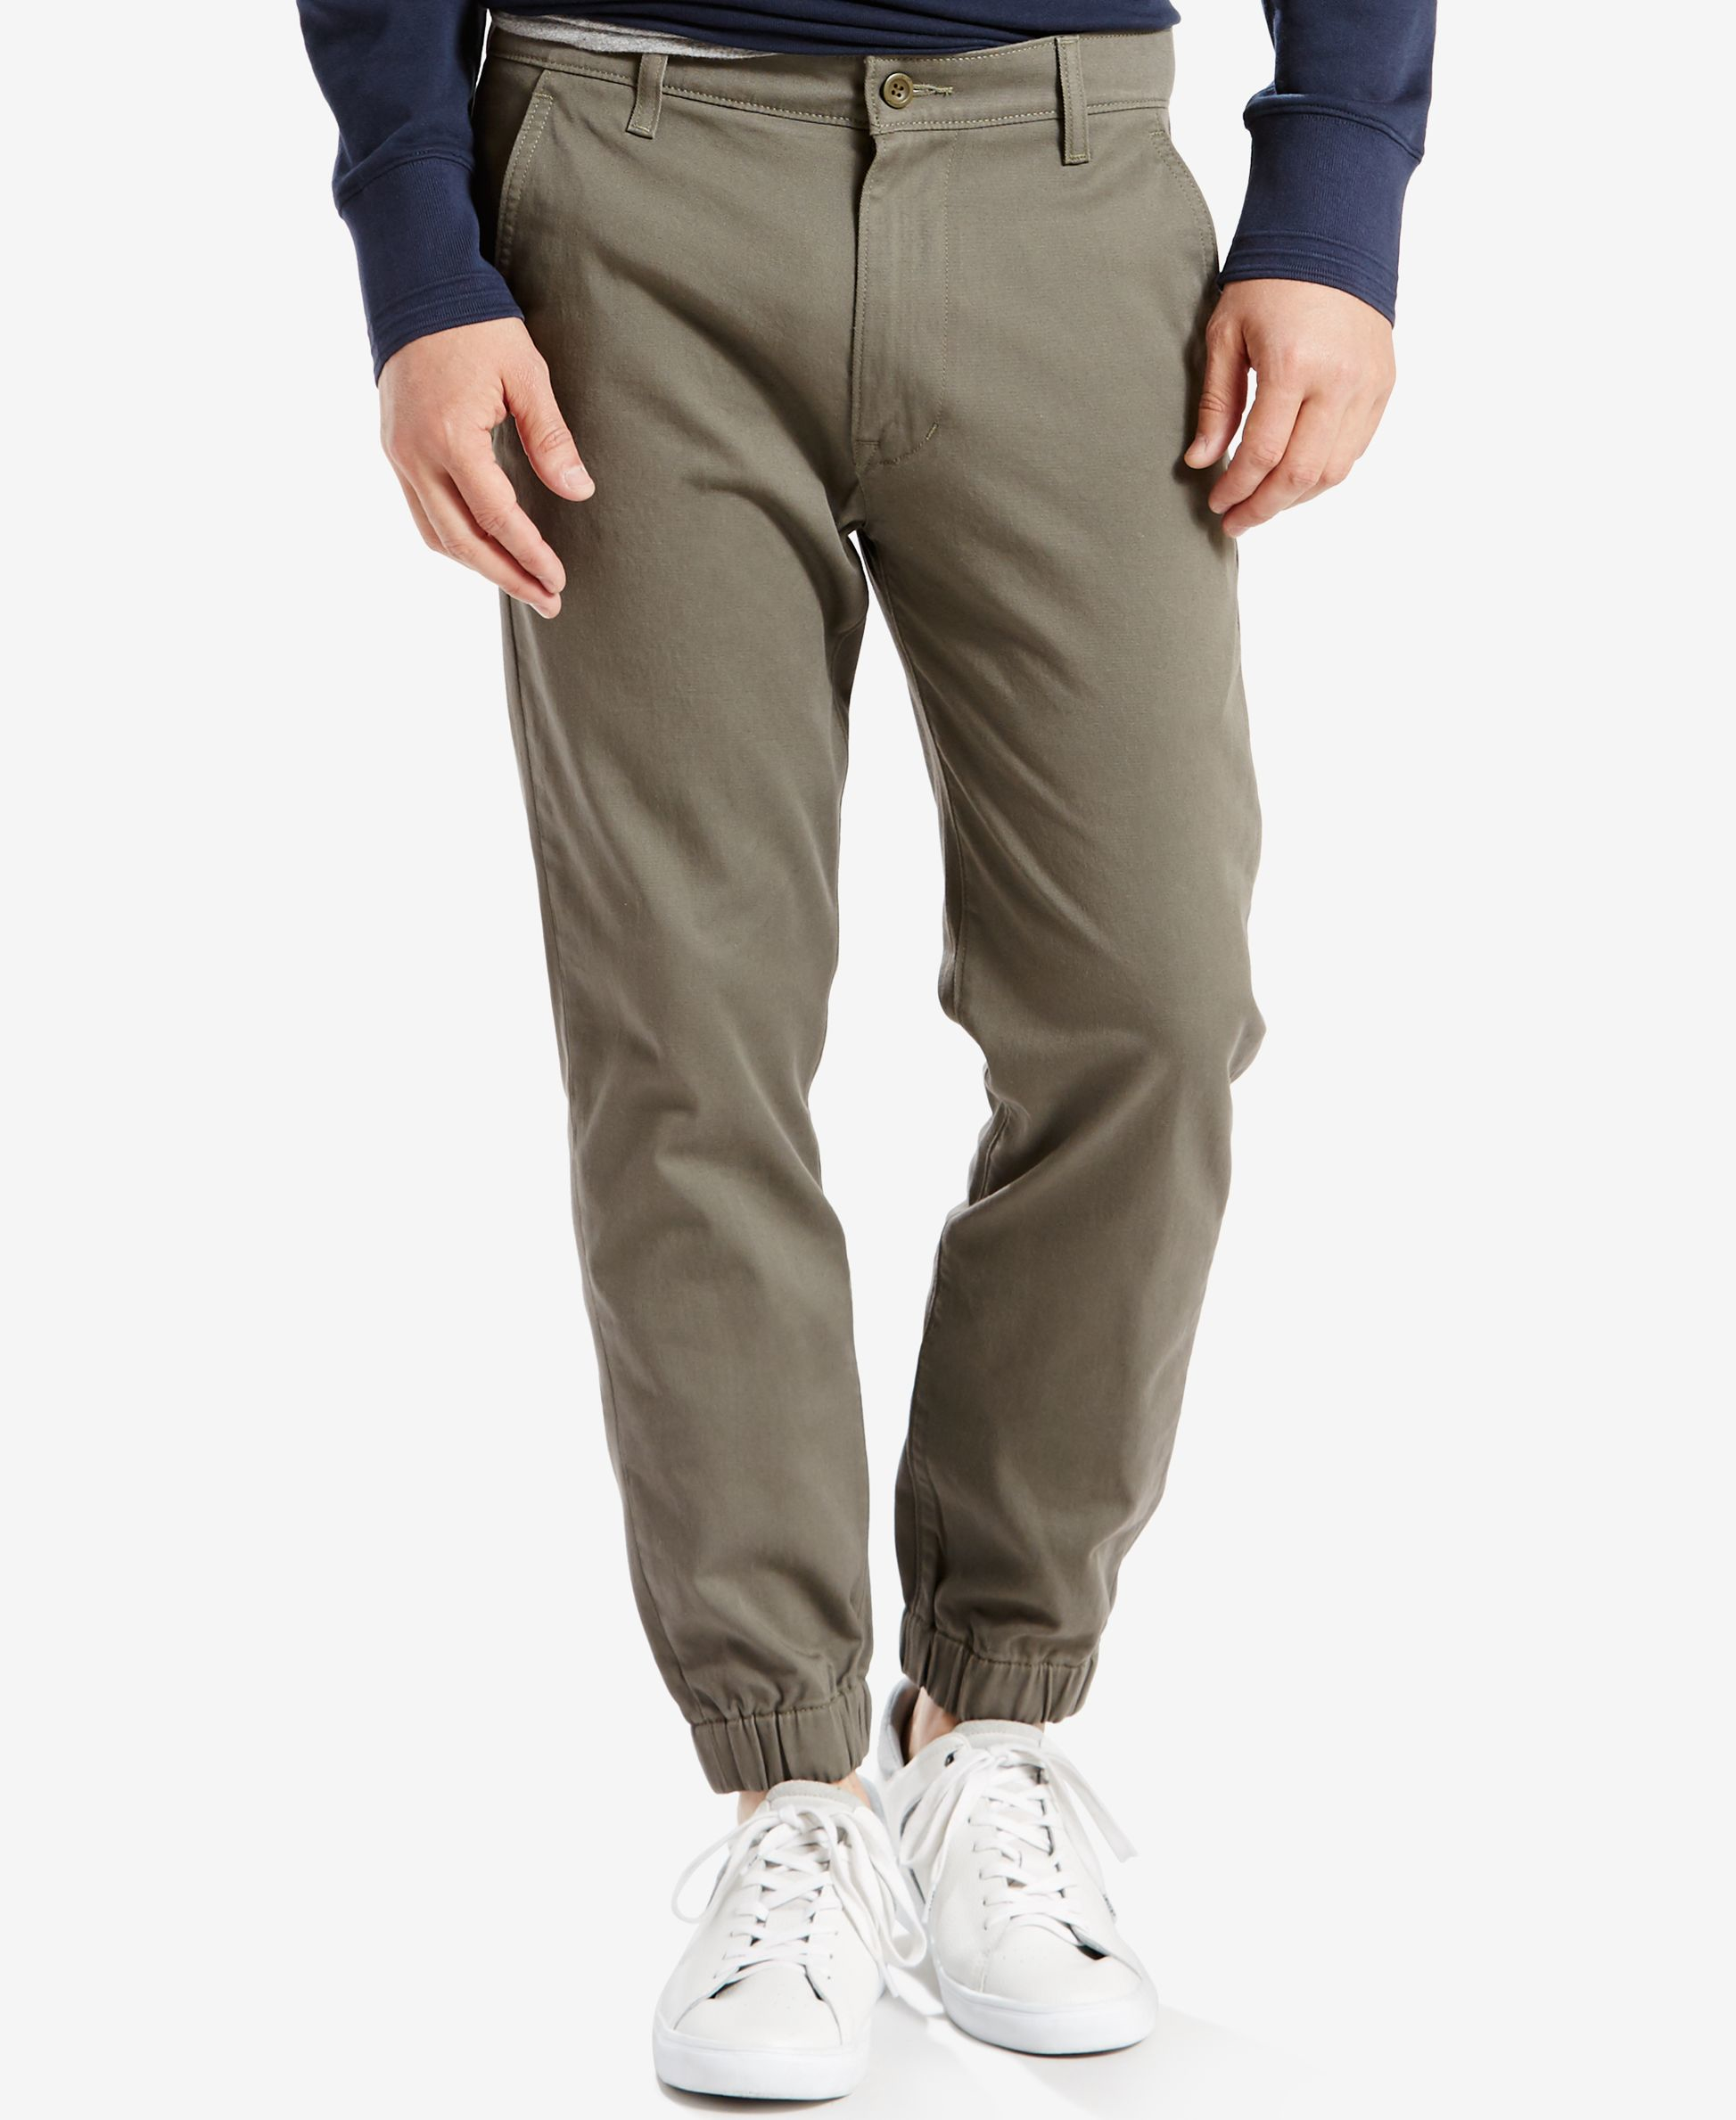 Lyst - Levi'S Men's Chino Jogger Pants in Green for Men